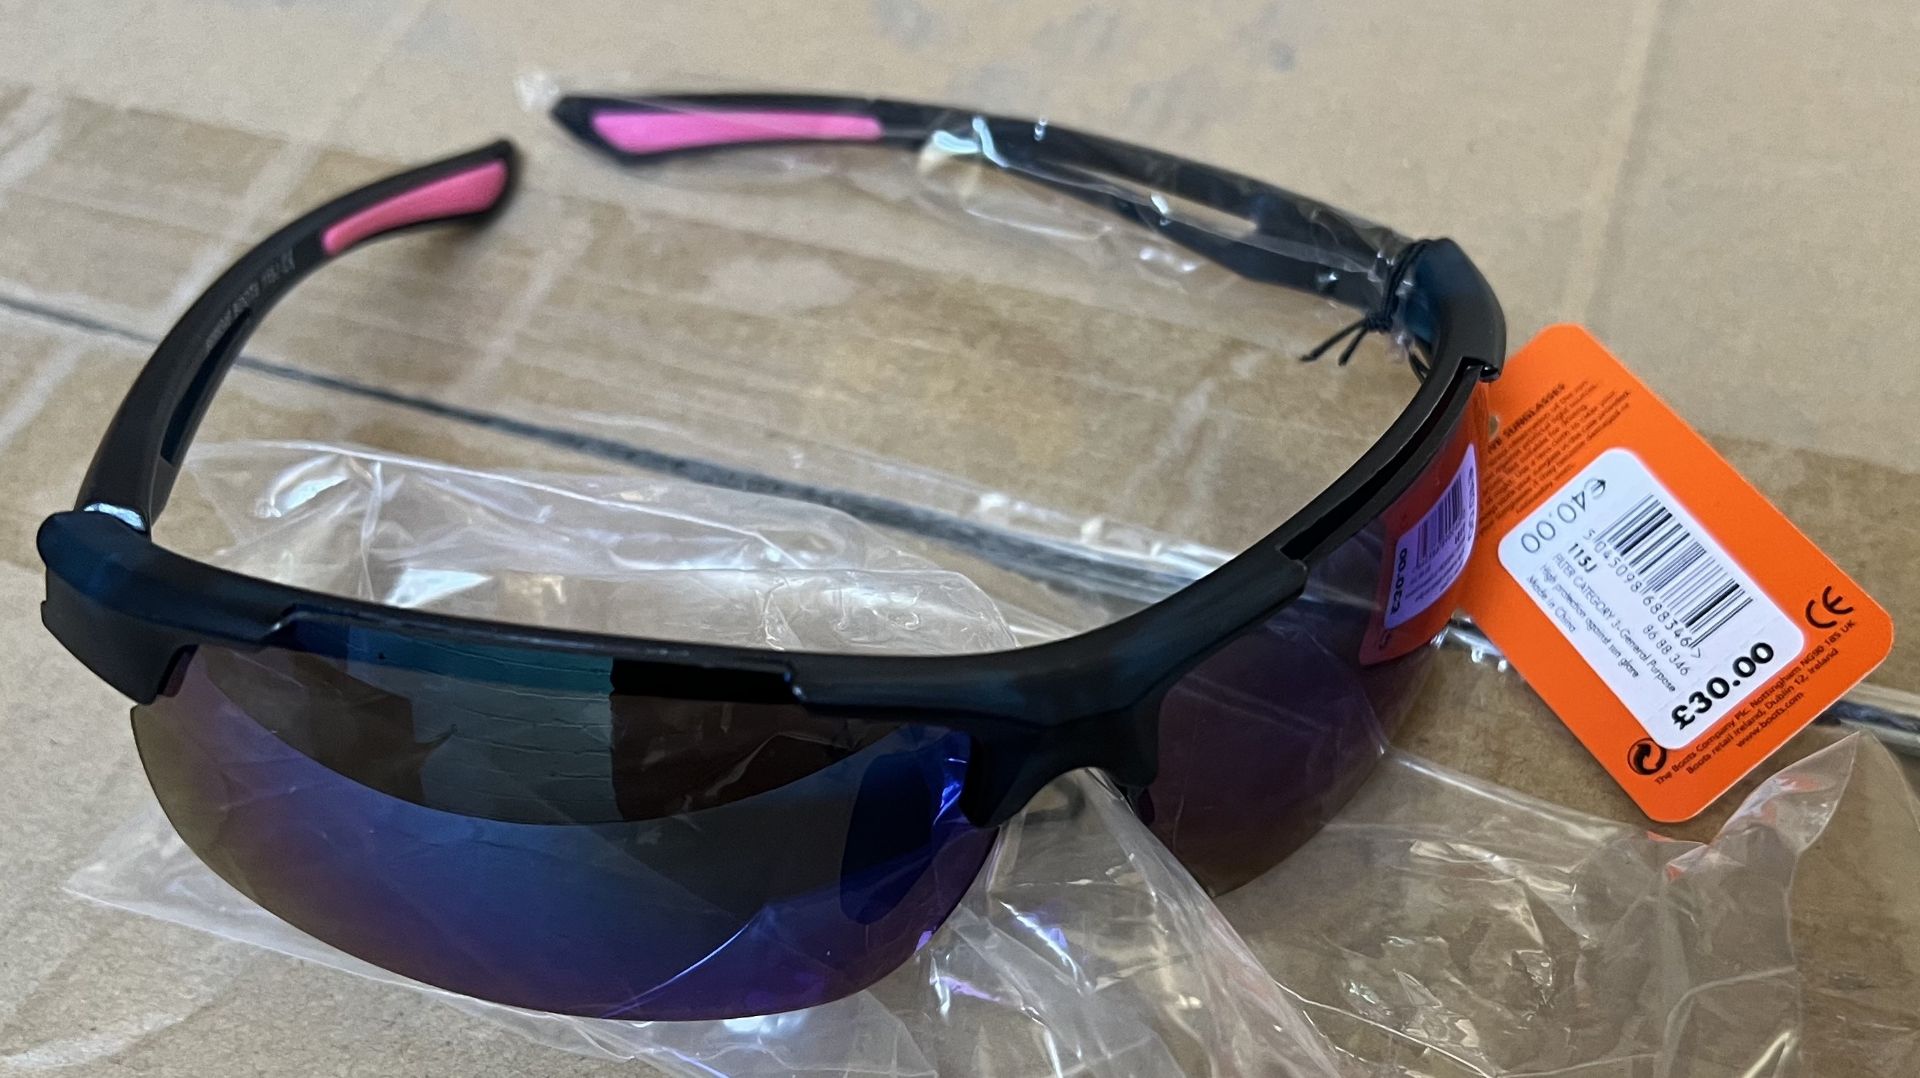 40 x Boots Active Sports Styled Sunglasses 100% UVA - (NEW) - BOOTS RRP Â£1,000 !